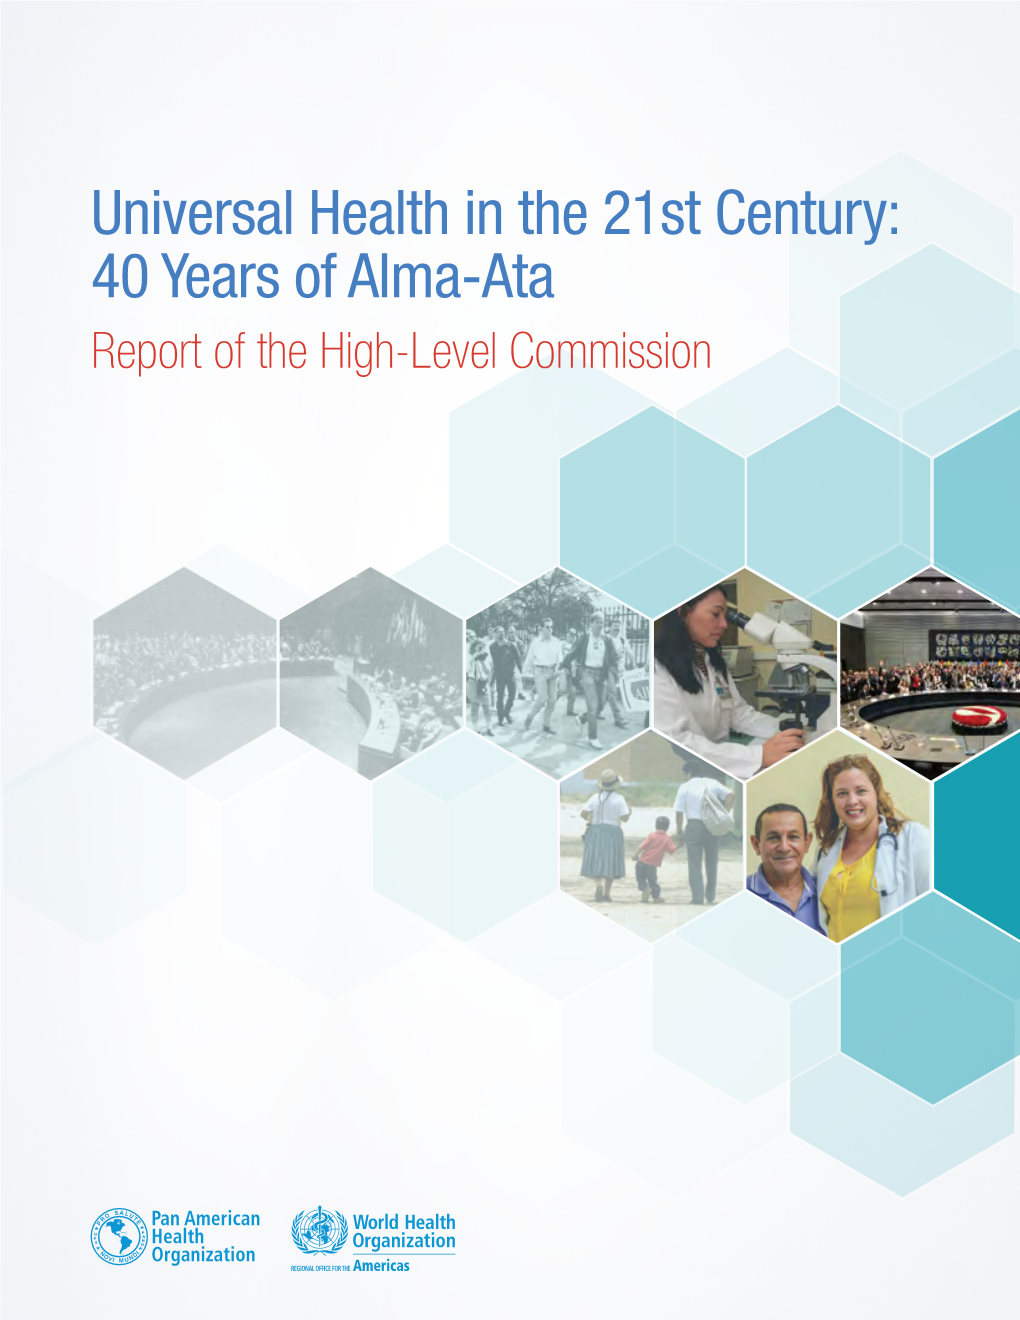 Universal Health in the 21St Century: 40 Years of Alma-Ata Report of the High-Level Commission